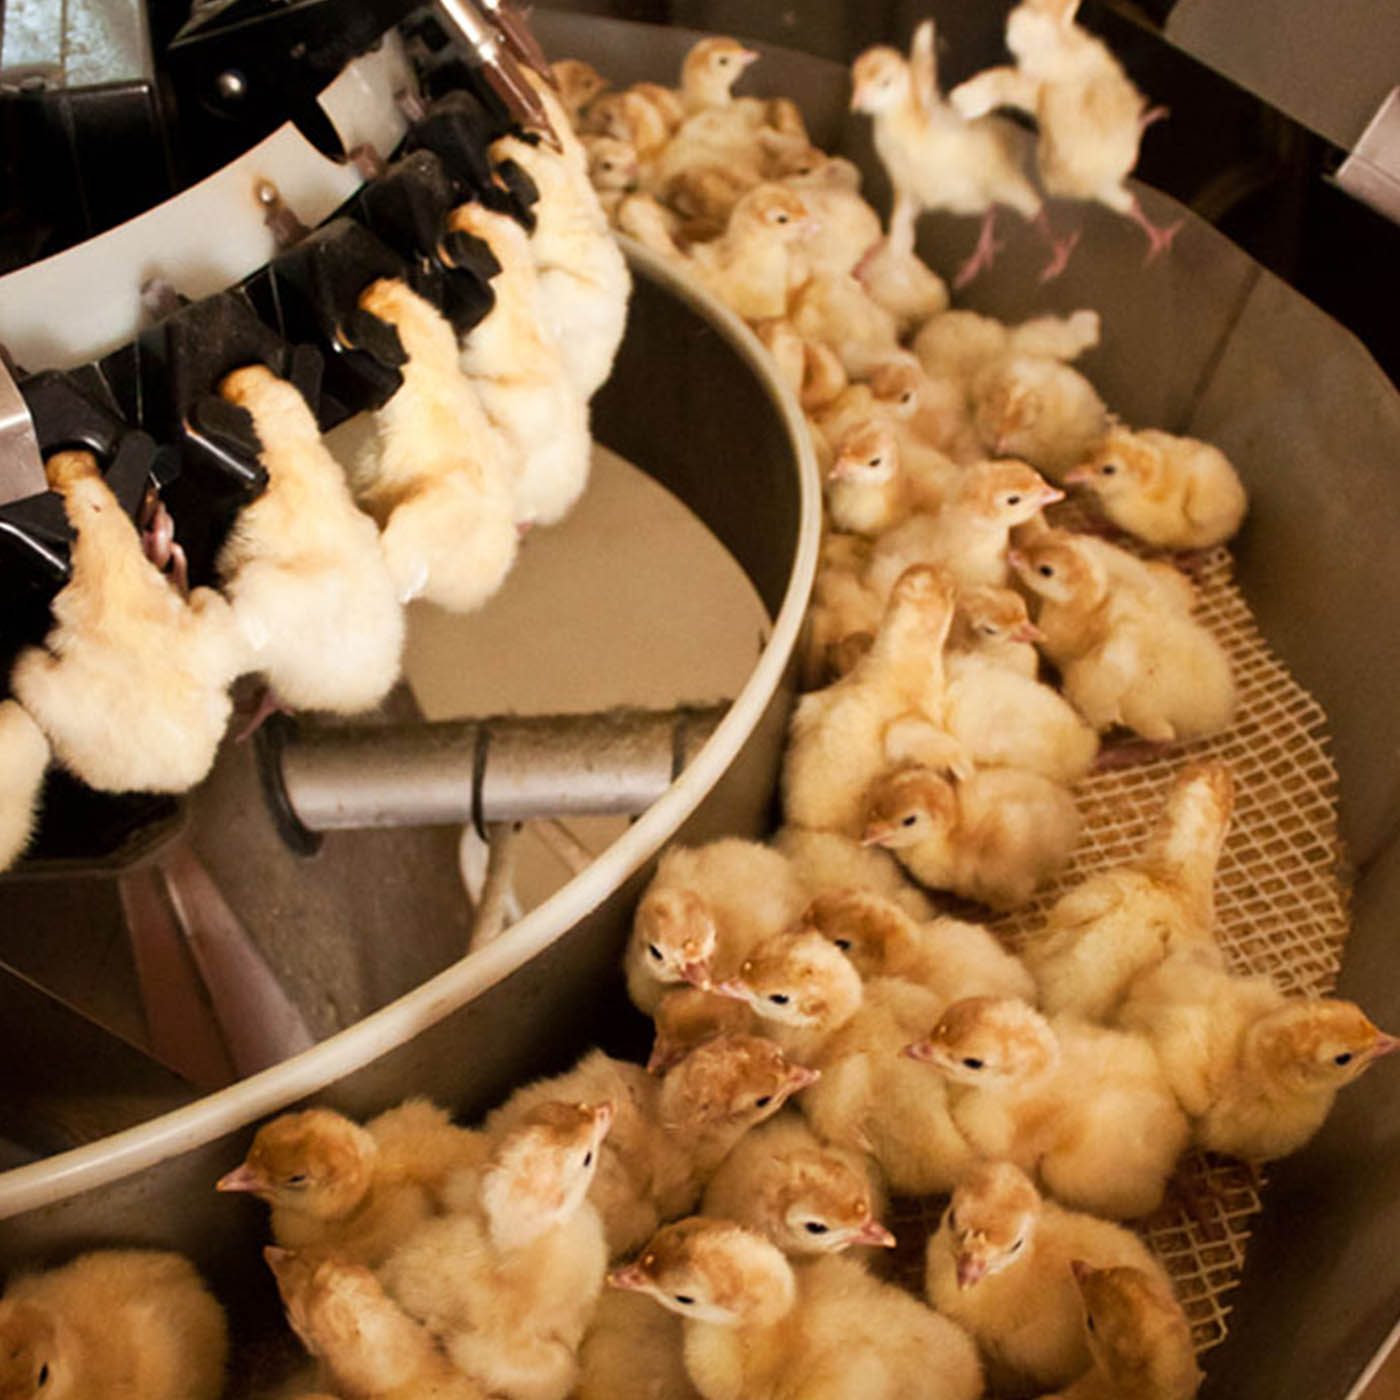 Animal Equality Exposes the Cruelty of the Turkey Industry